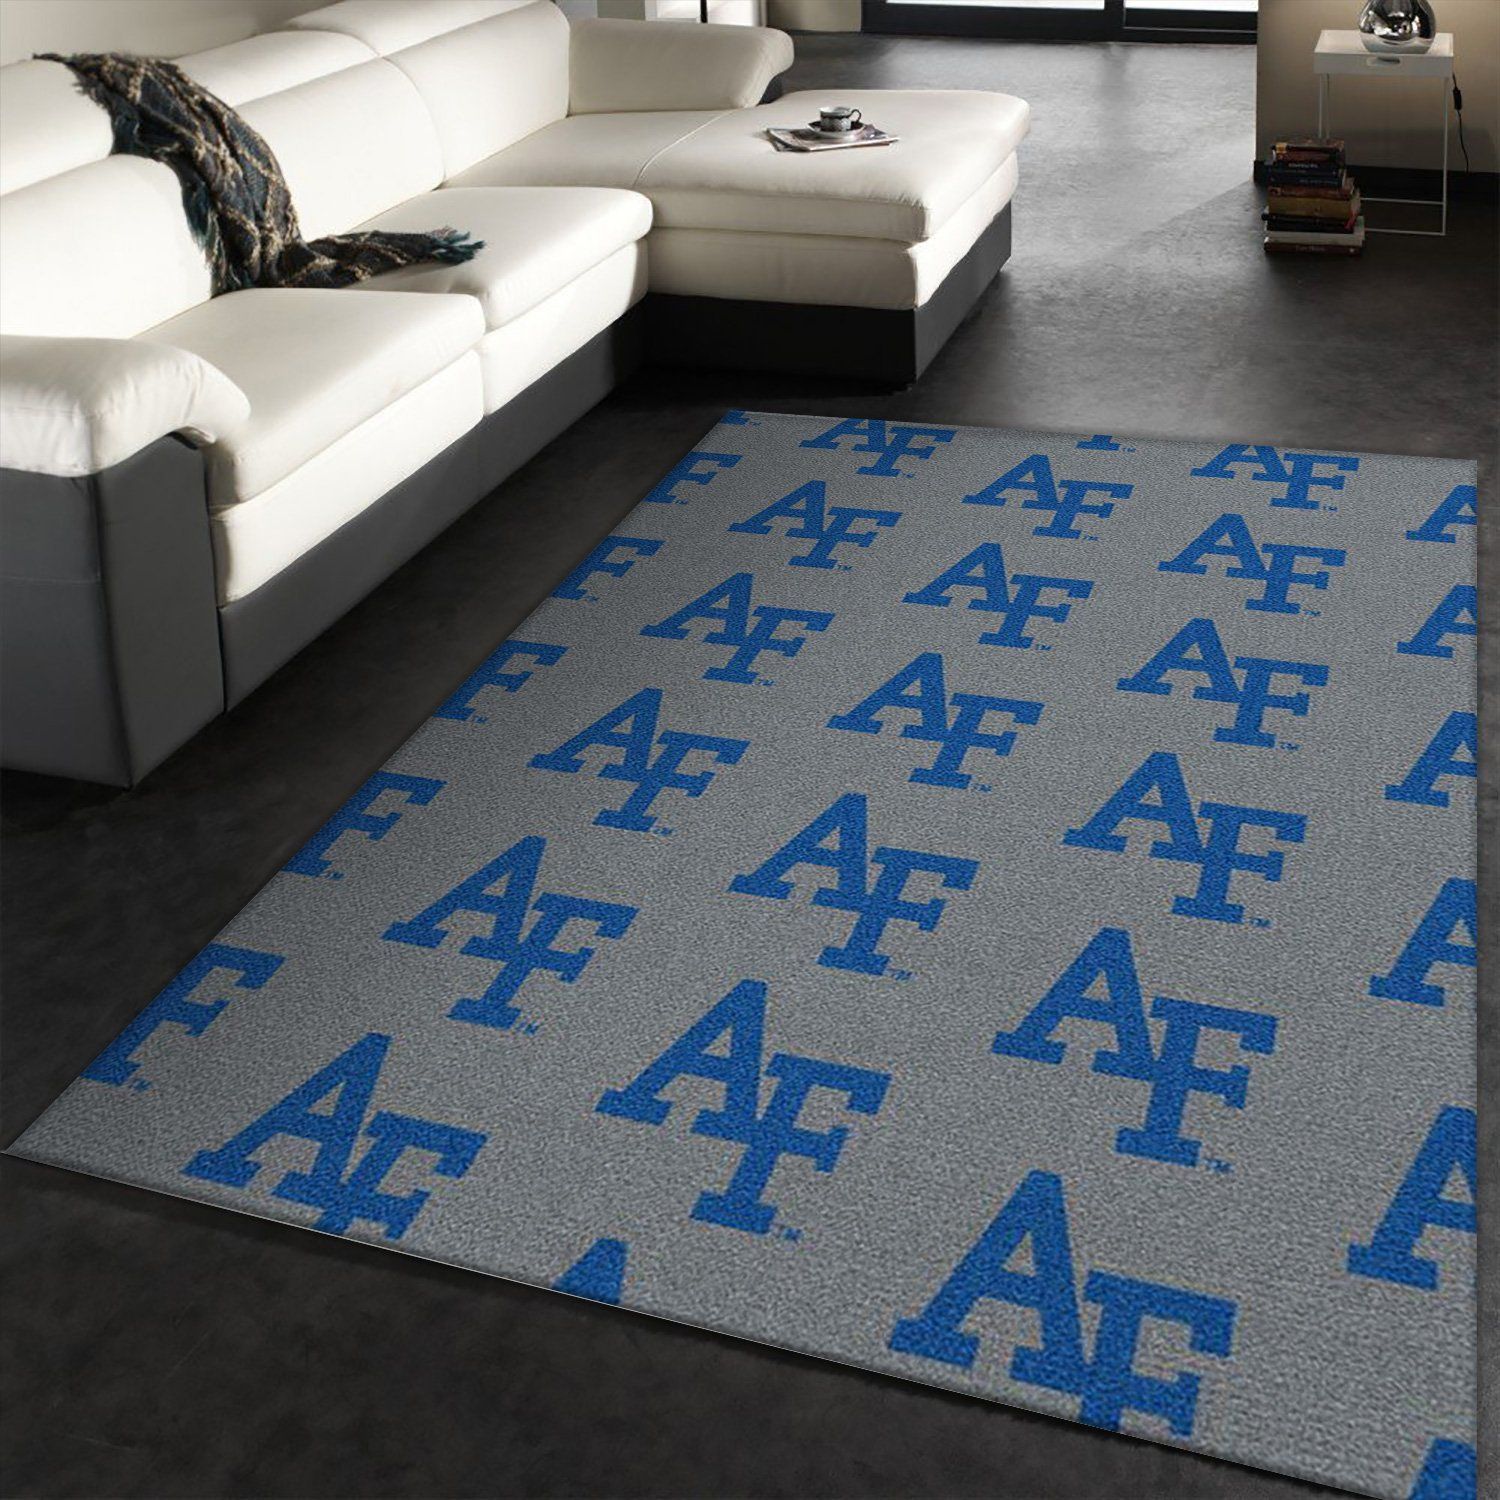 Air Force University Repeating Logo Ncaa Us Type 8484 Rug Area Carpet Home Decor Living Room